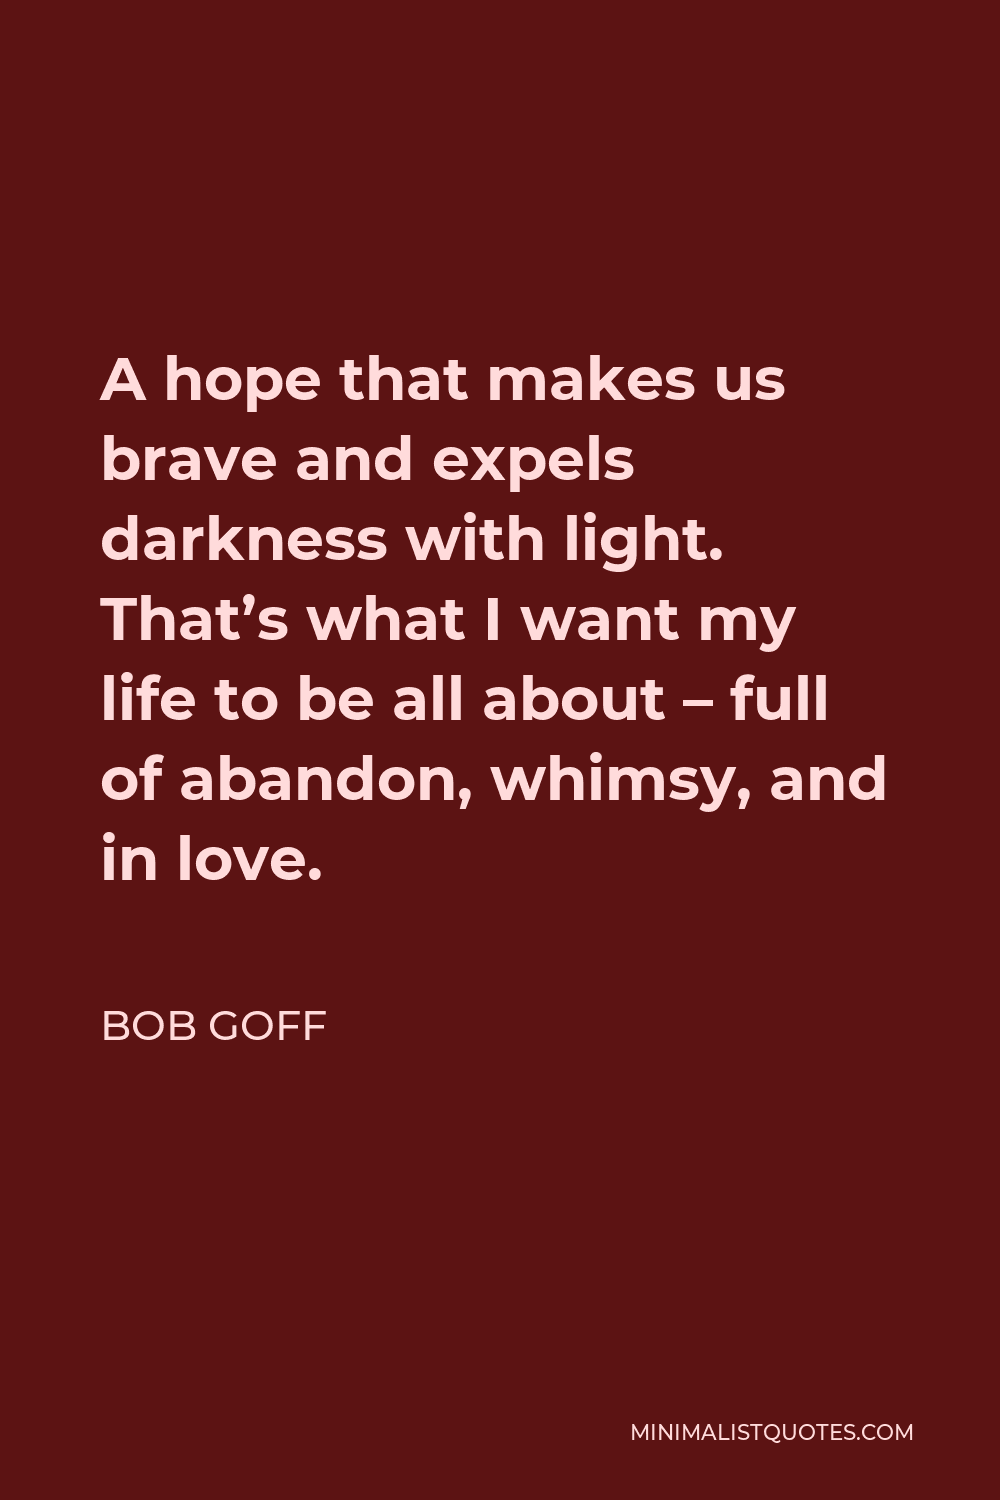 Bob Goff Quote - A hope that makes us brave and expels darkness with light. That’s what I want my life to be all about – full of abandon, whimsy, and in love.